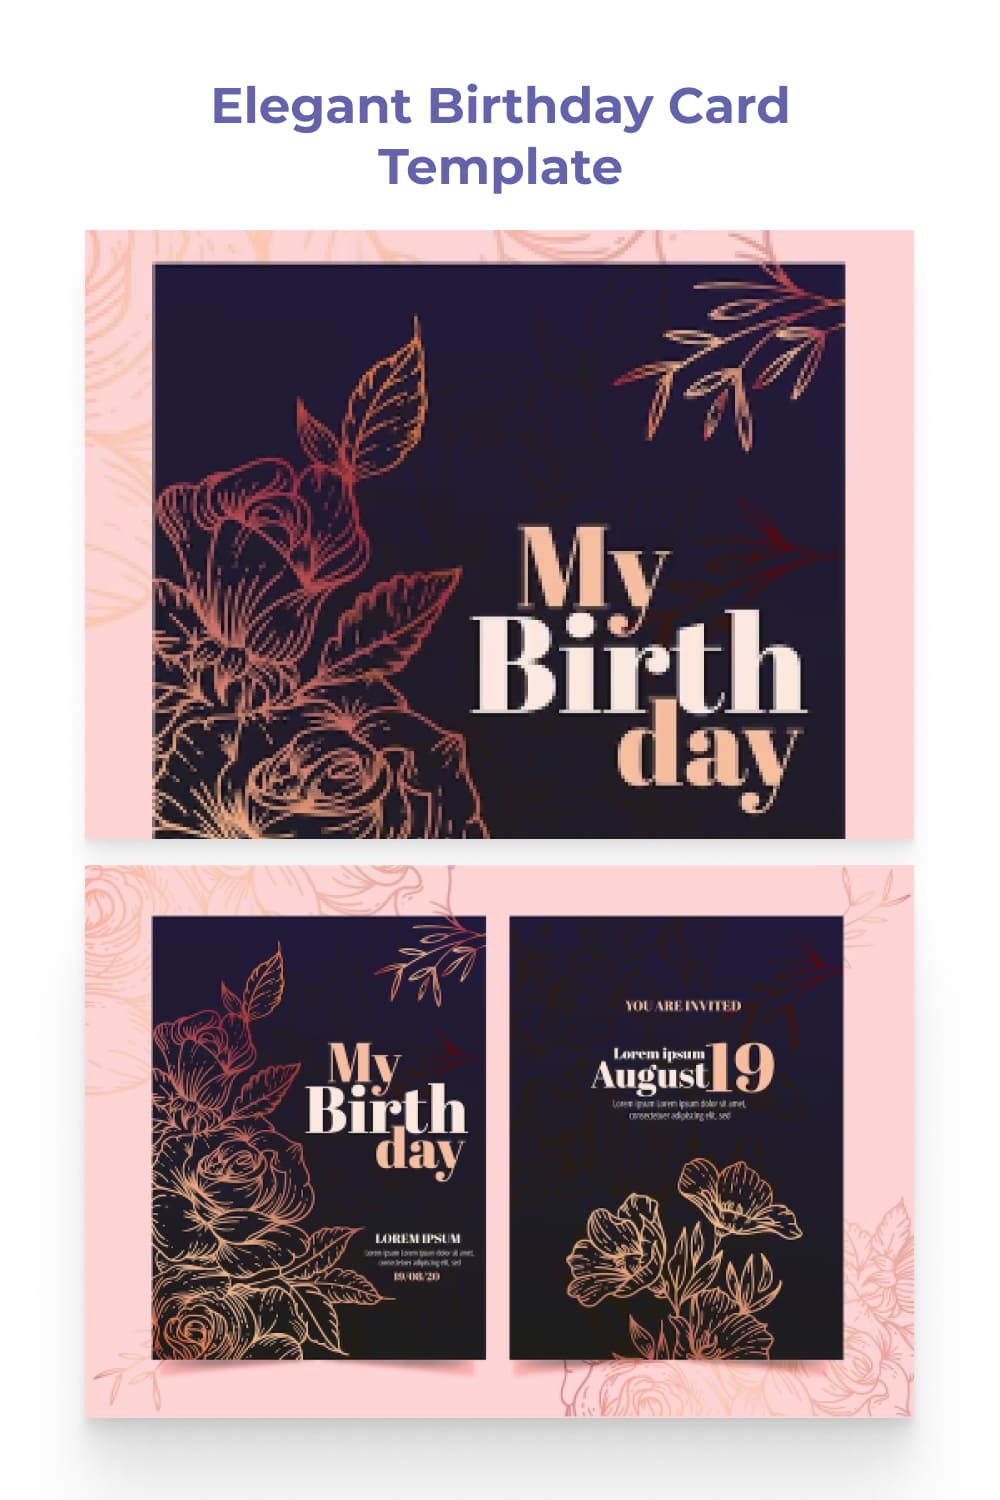 Birthday invitation with silhouettes of flowers on a dark background.